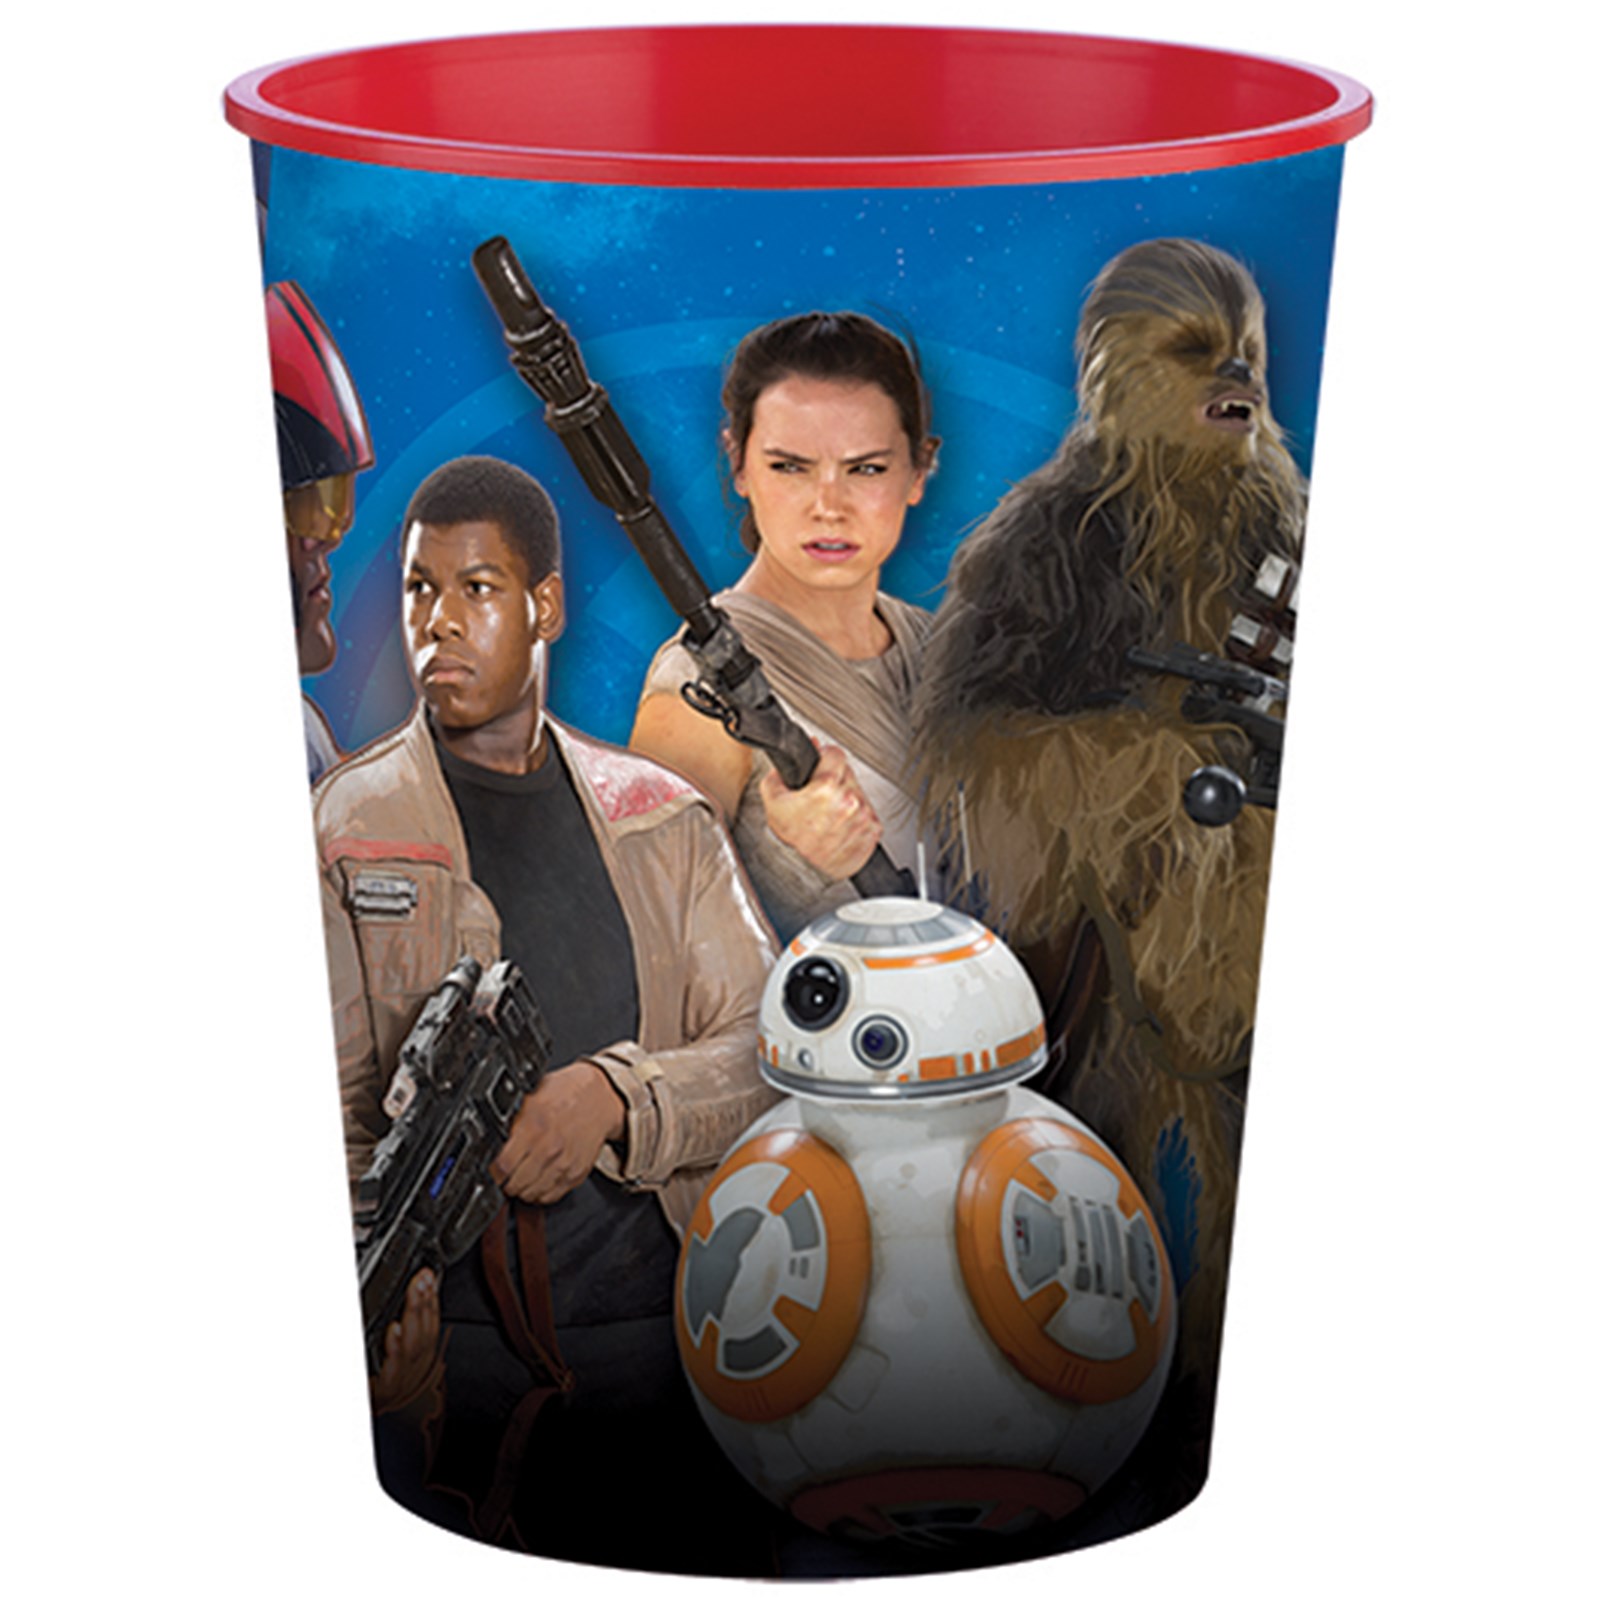 Star Wars 7 The Force Awakens 16 oz. Plastic Cup